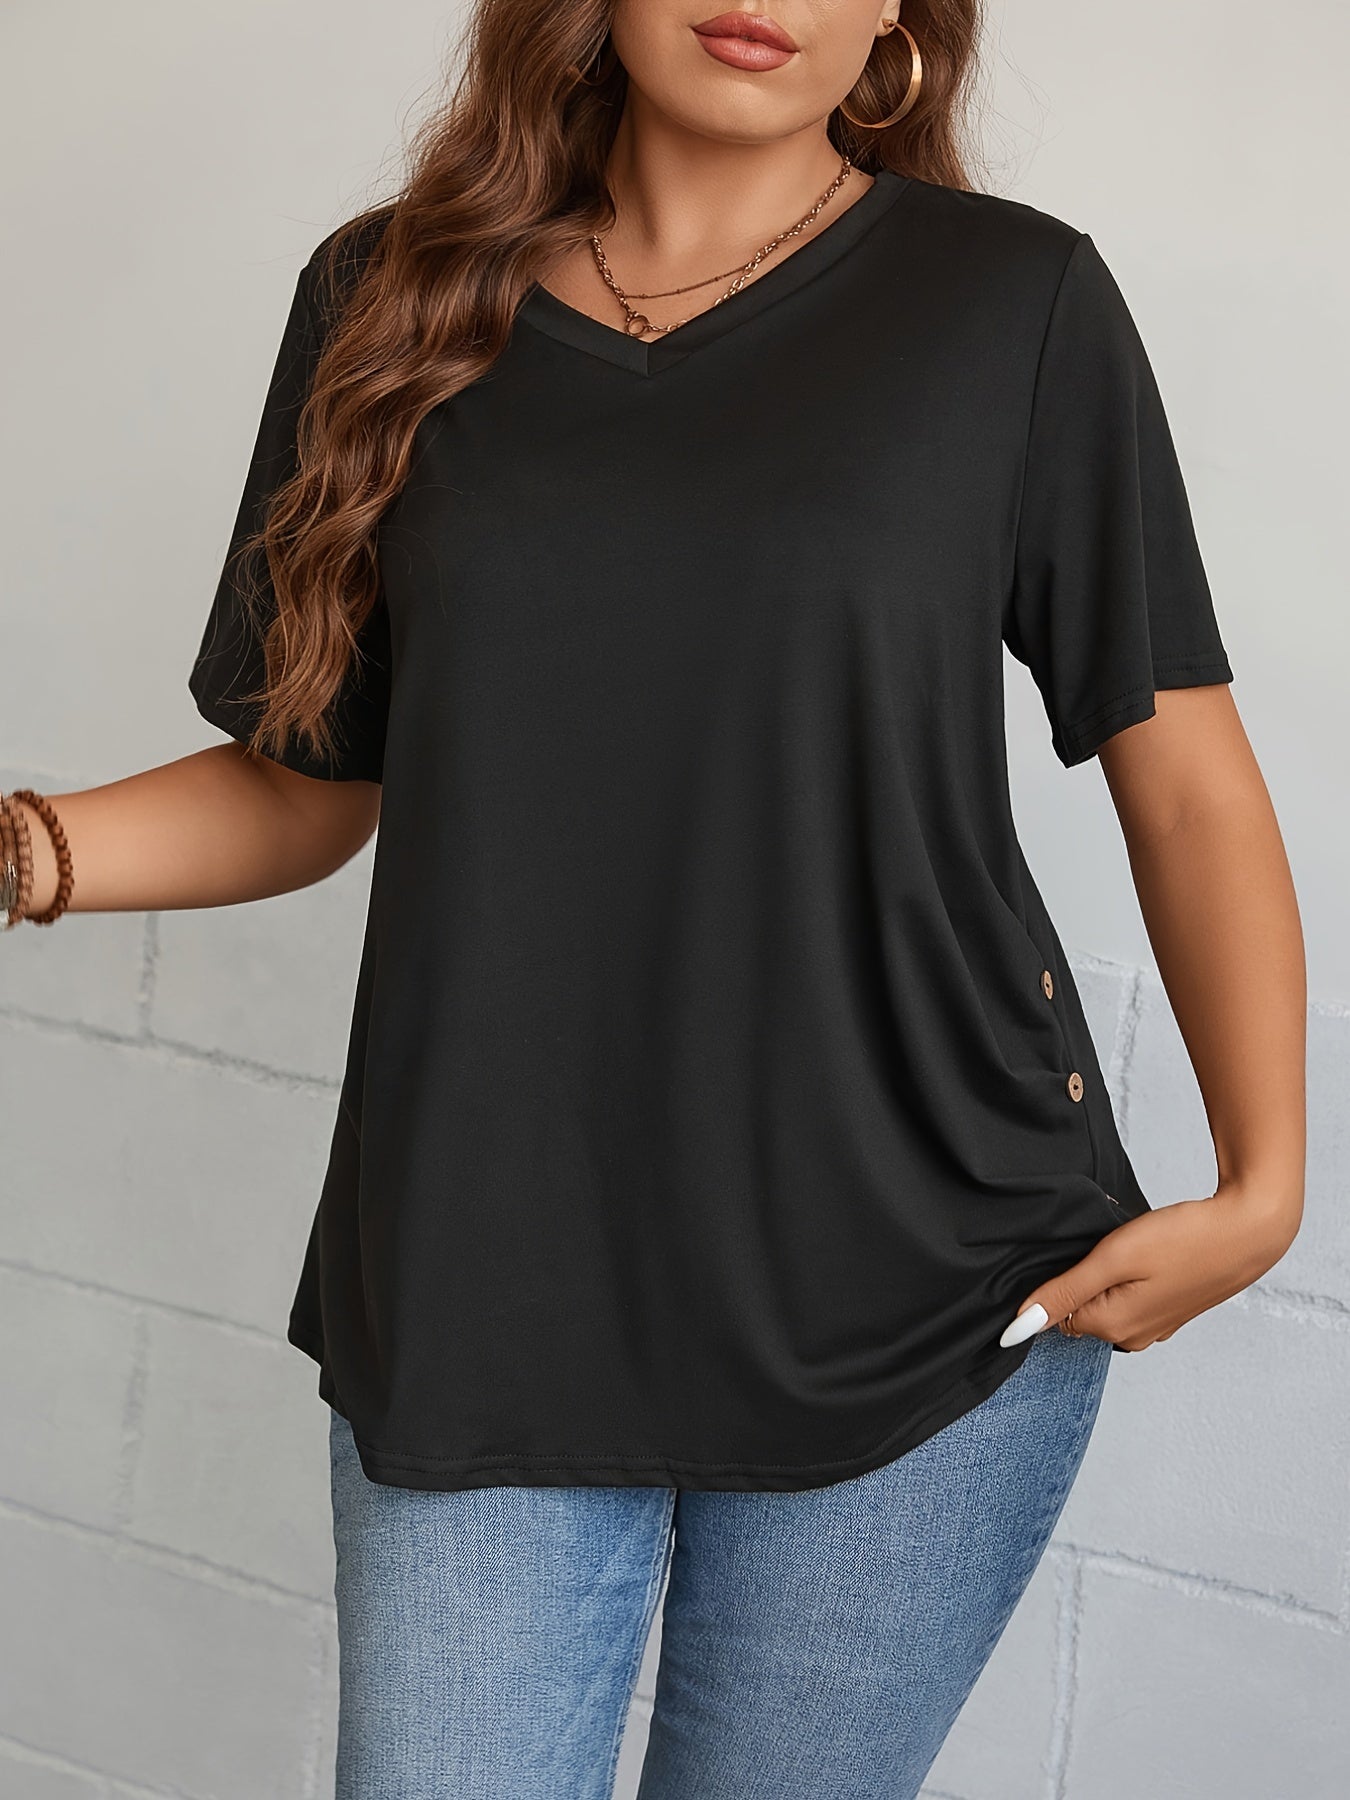 Plus Size Casual Top, Women's Plus Solid Button Decor Short Sleeve V Neck Ruched Tee